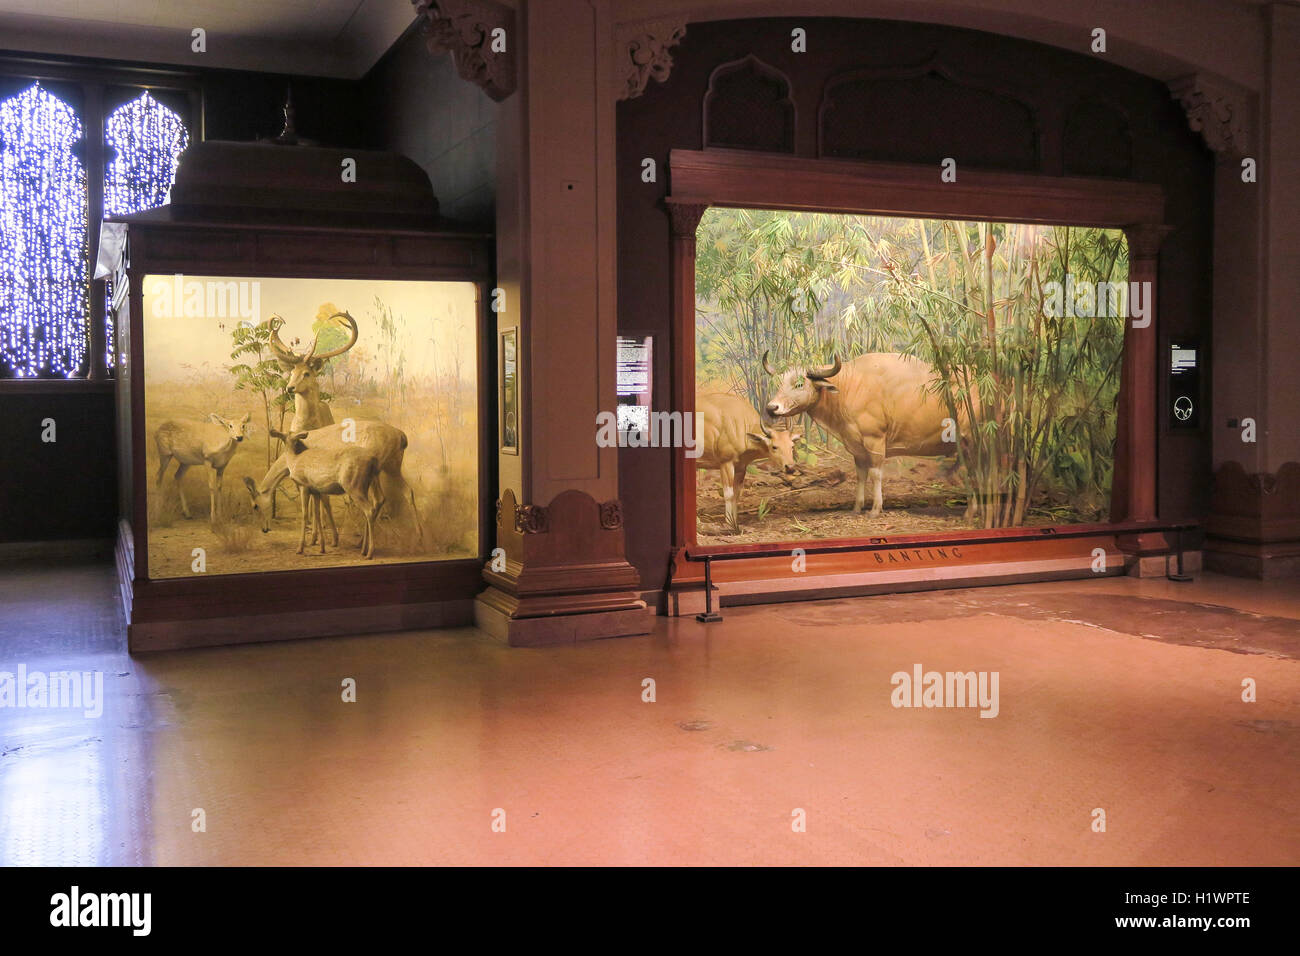 American Museum of Natural History, NEW YORK Banque D'Images